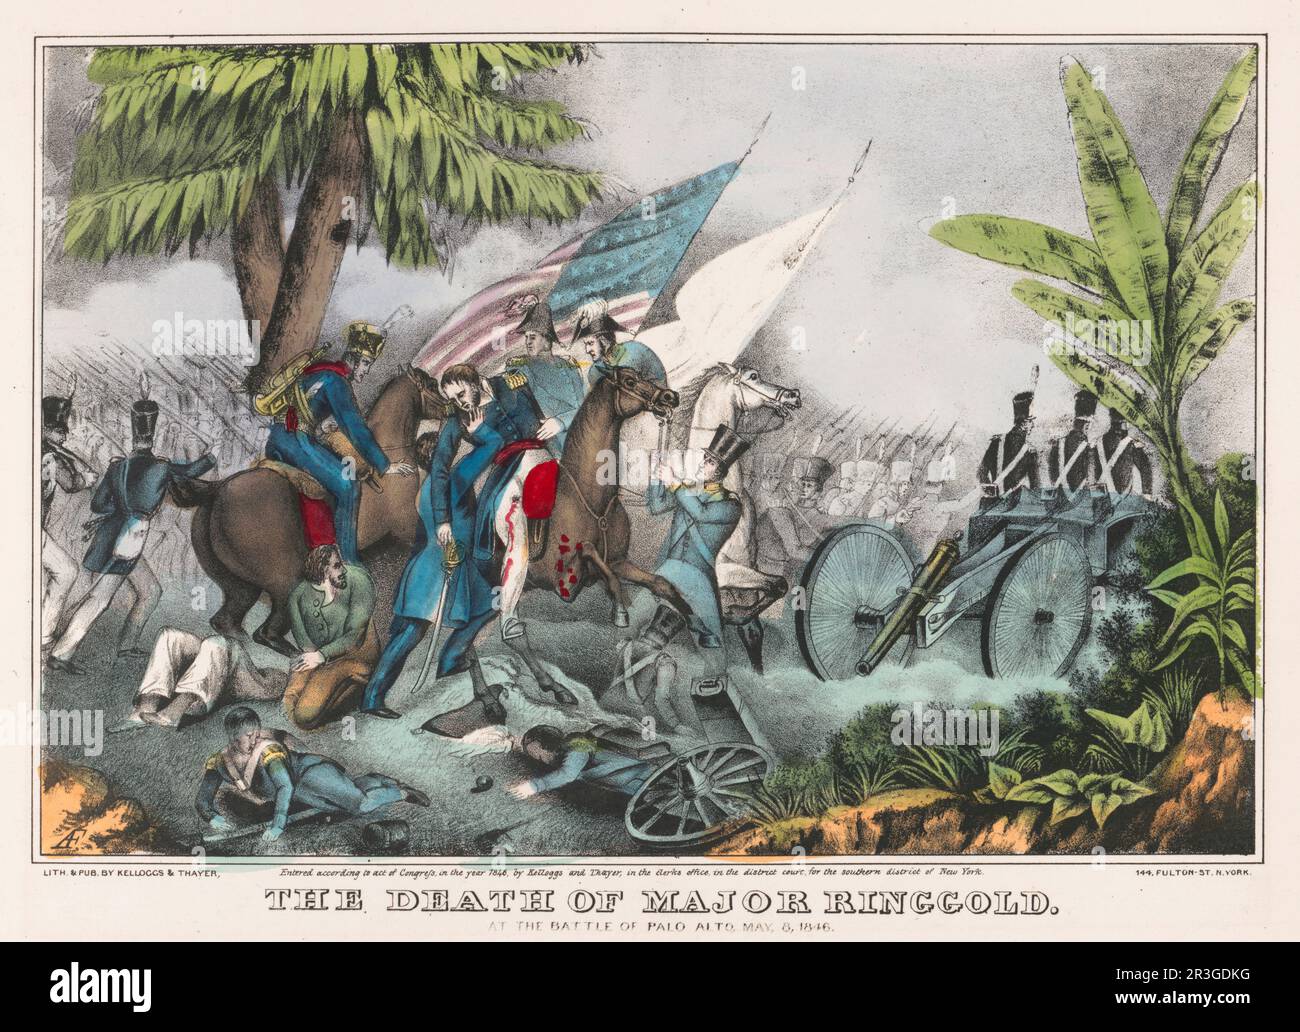 May 8, 1846 - The death of Major Ringgold at the Battle of Palo Alto during the Mexican American War. Stock Photo